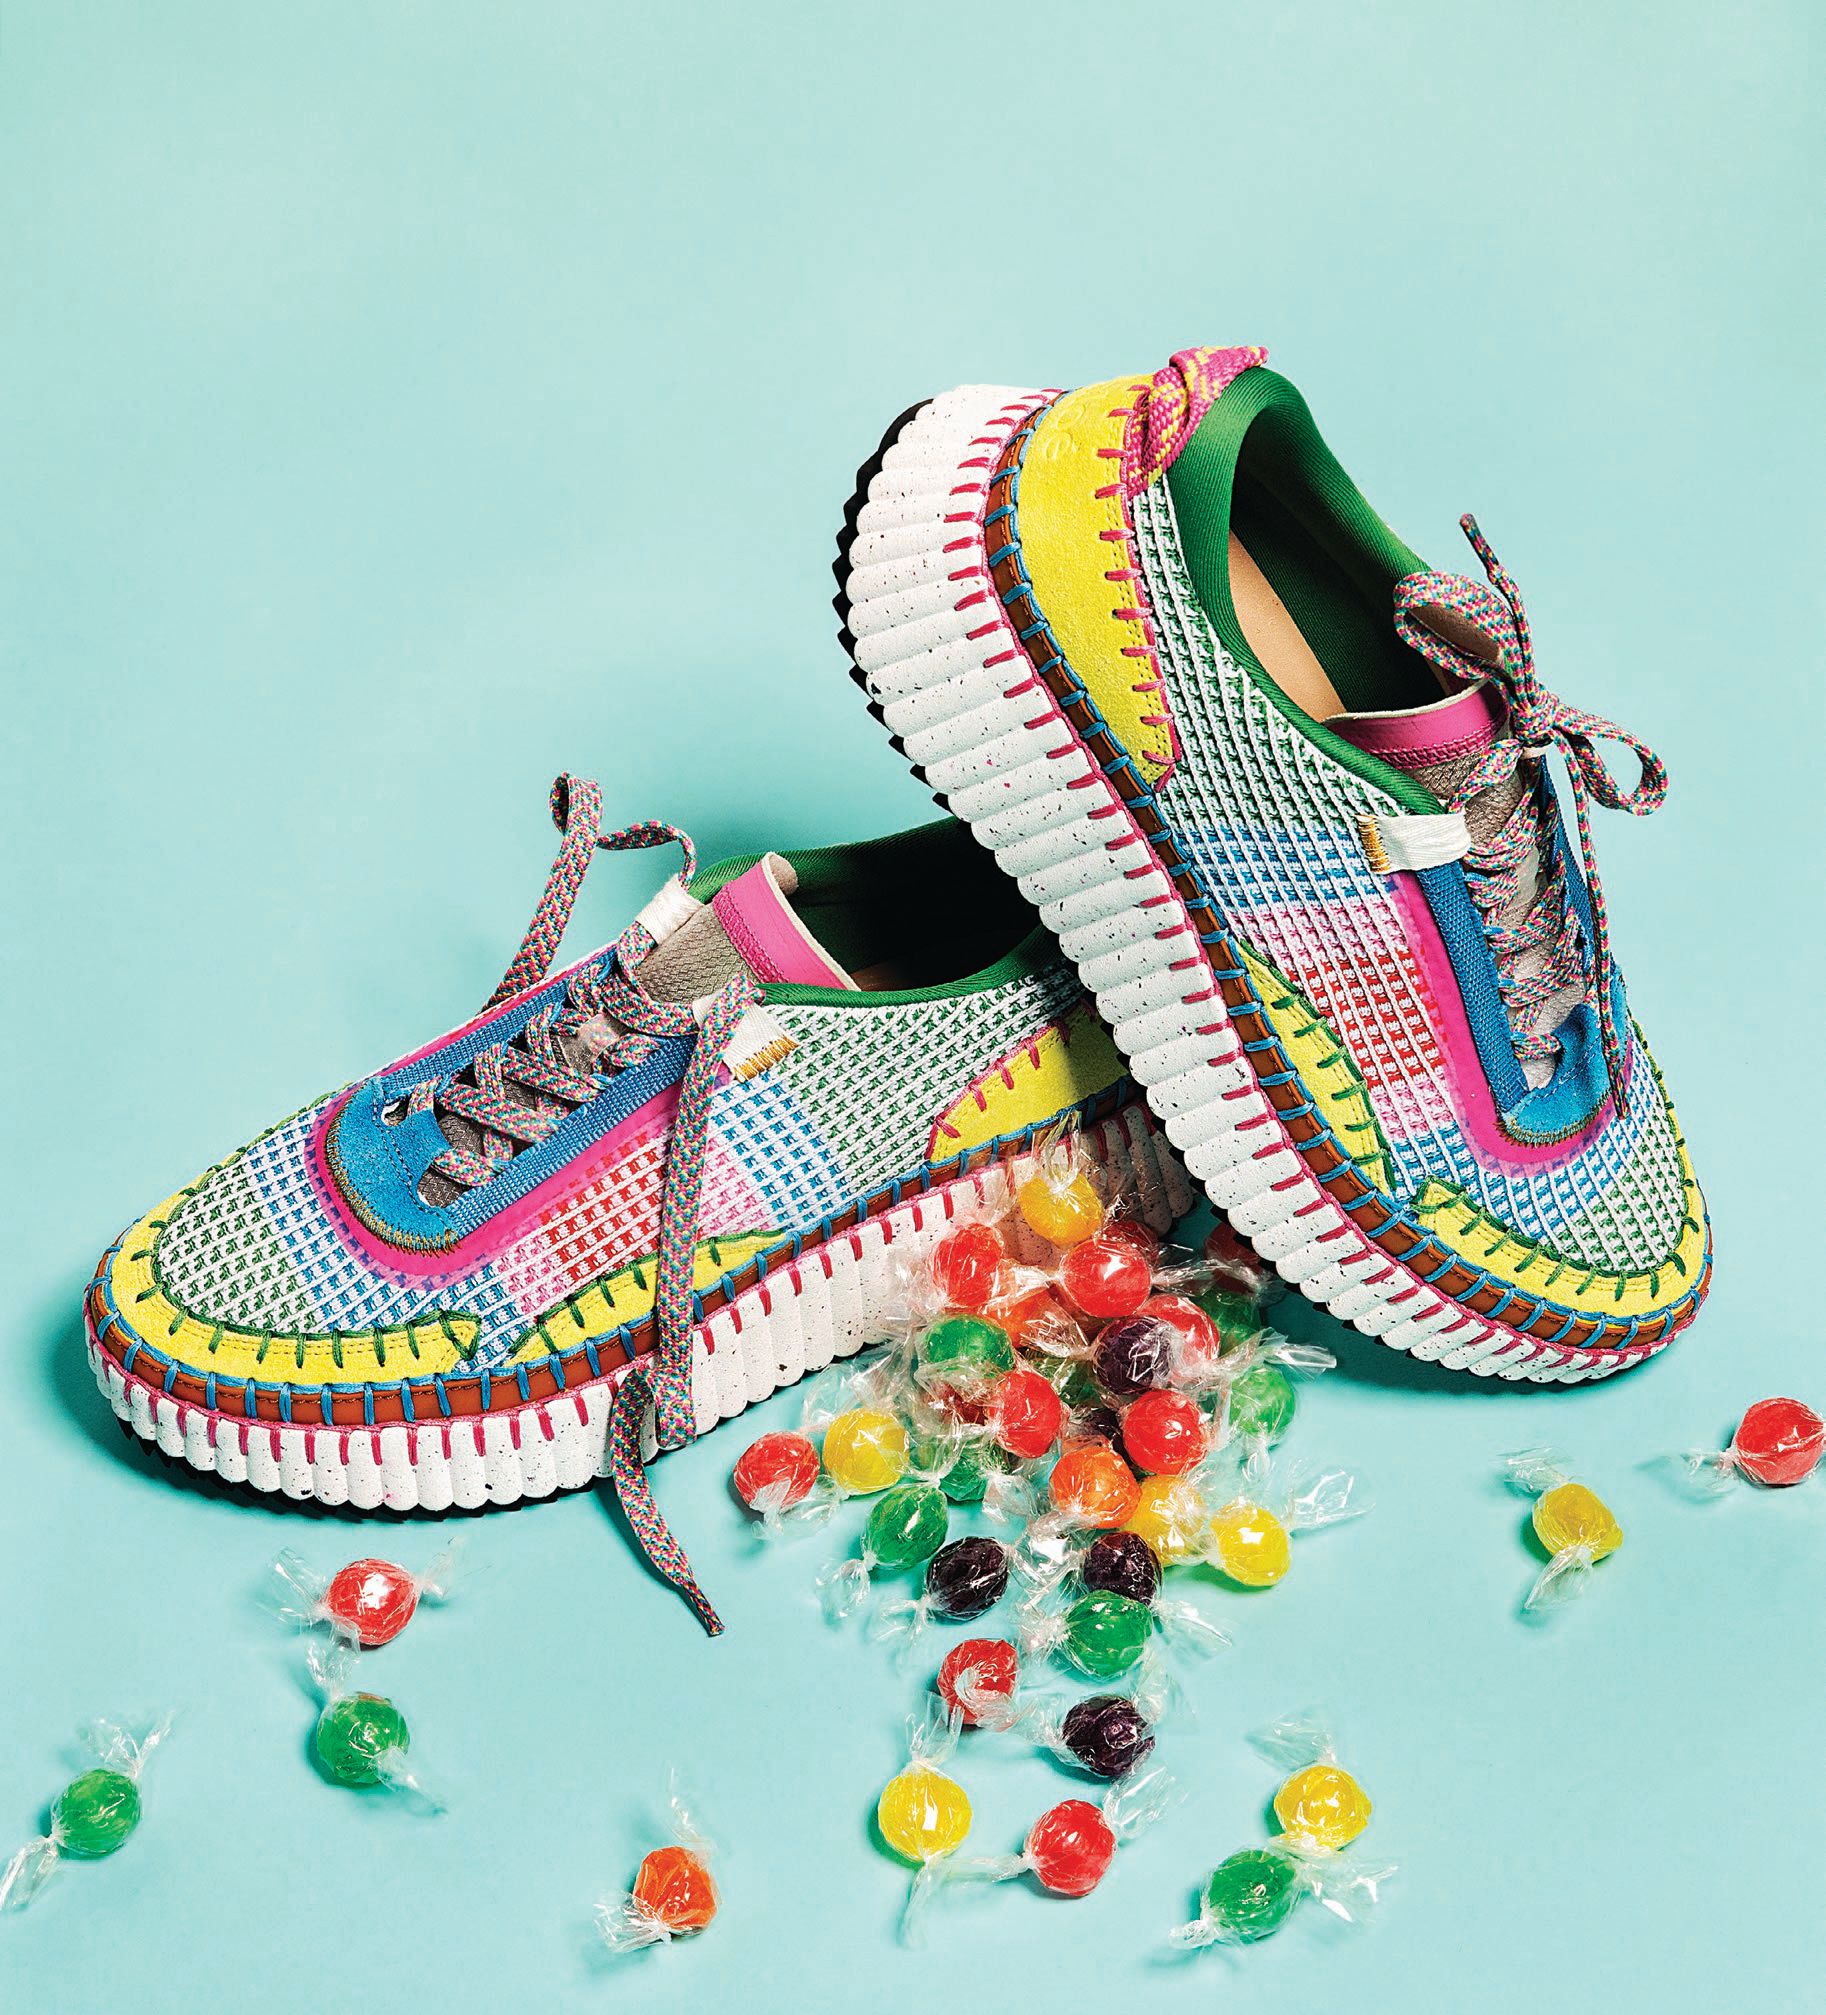 Chloé Nama sneaker in Happy Yellow, chloe.com PHOTOGRAPHED BY HELENA PALAZZI STYLED BY JAMES AGUIAR